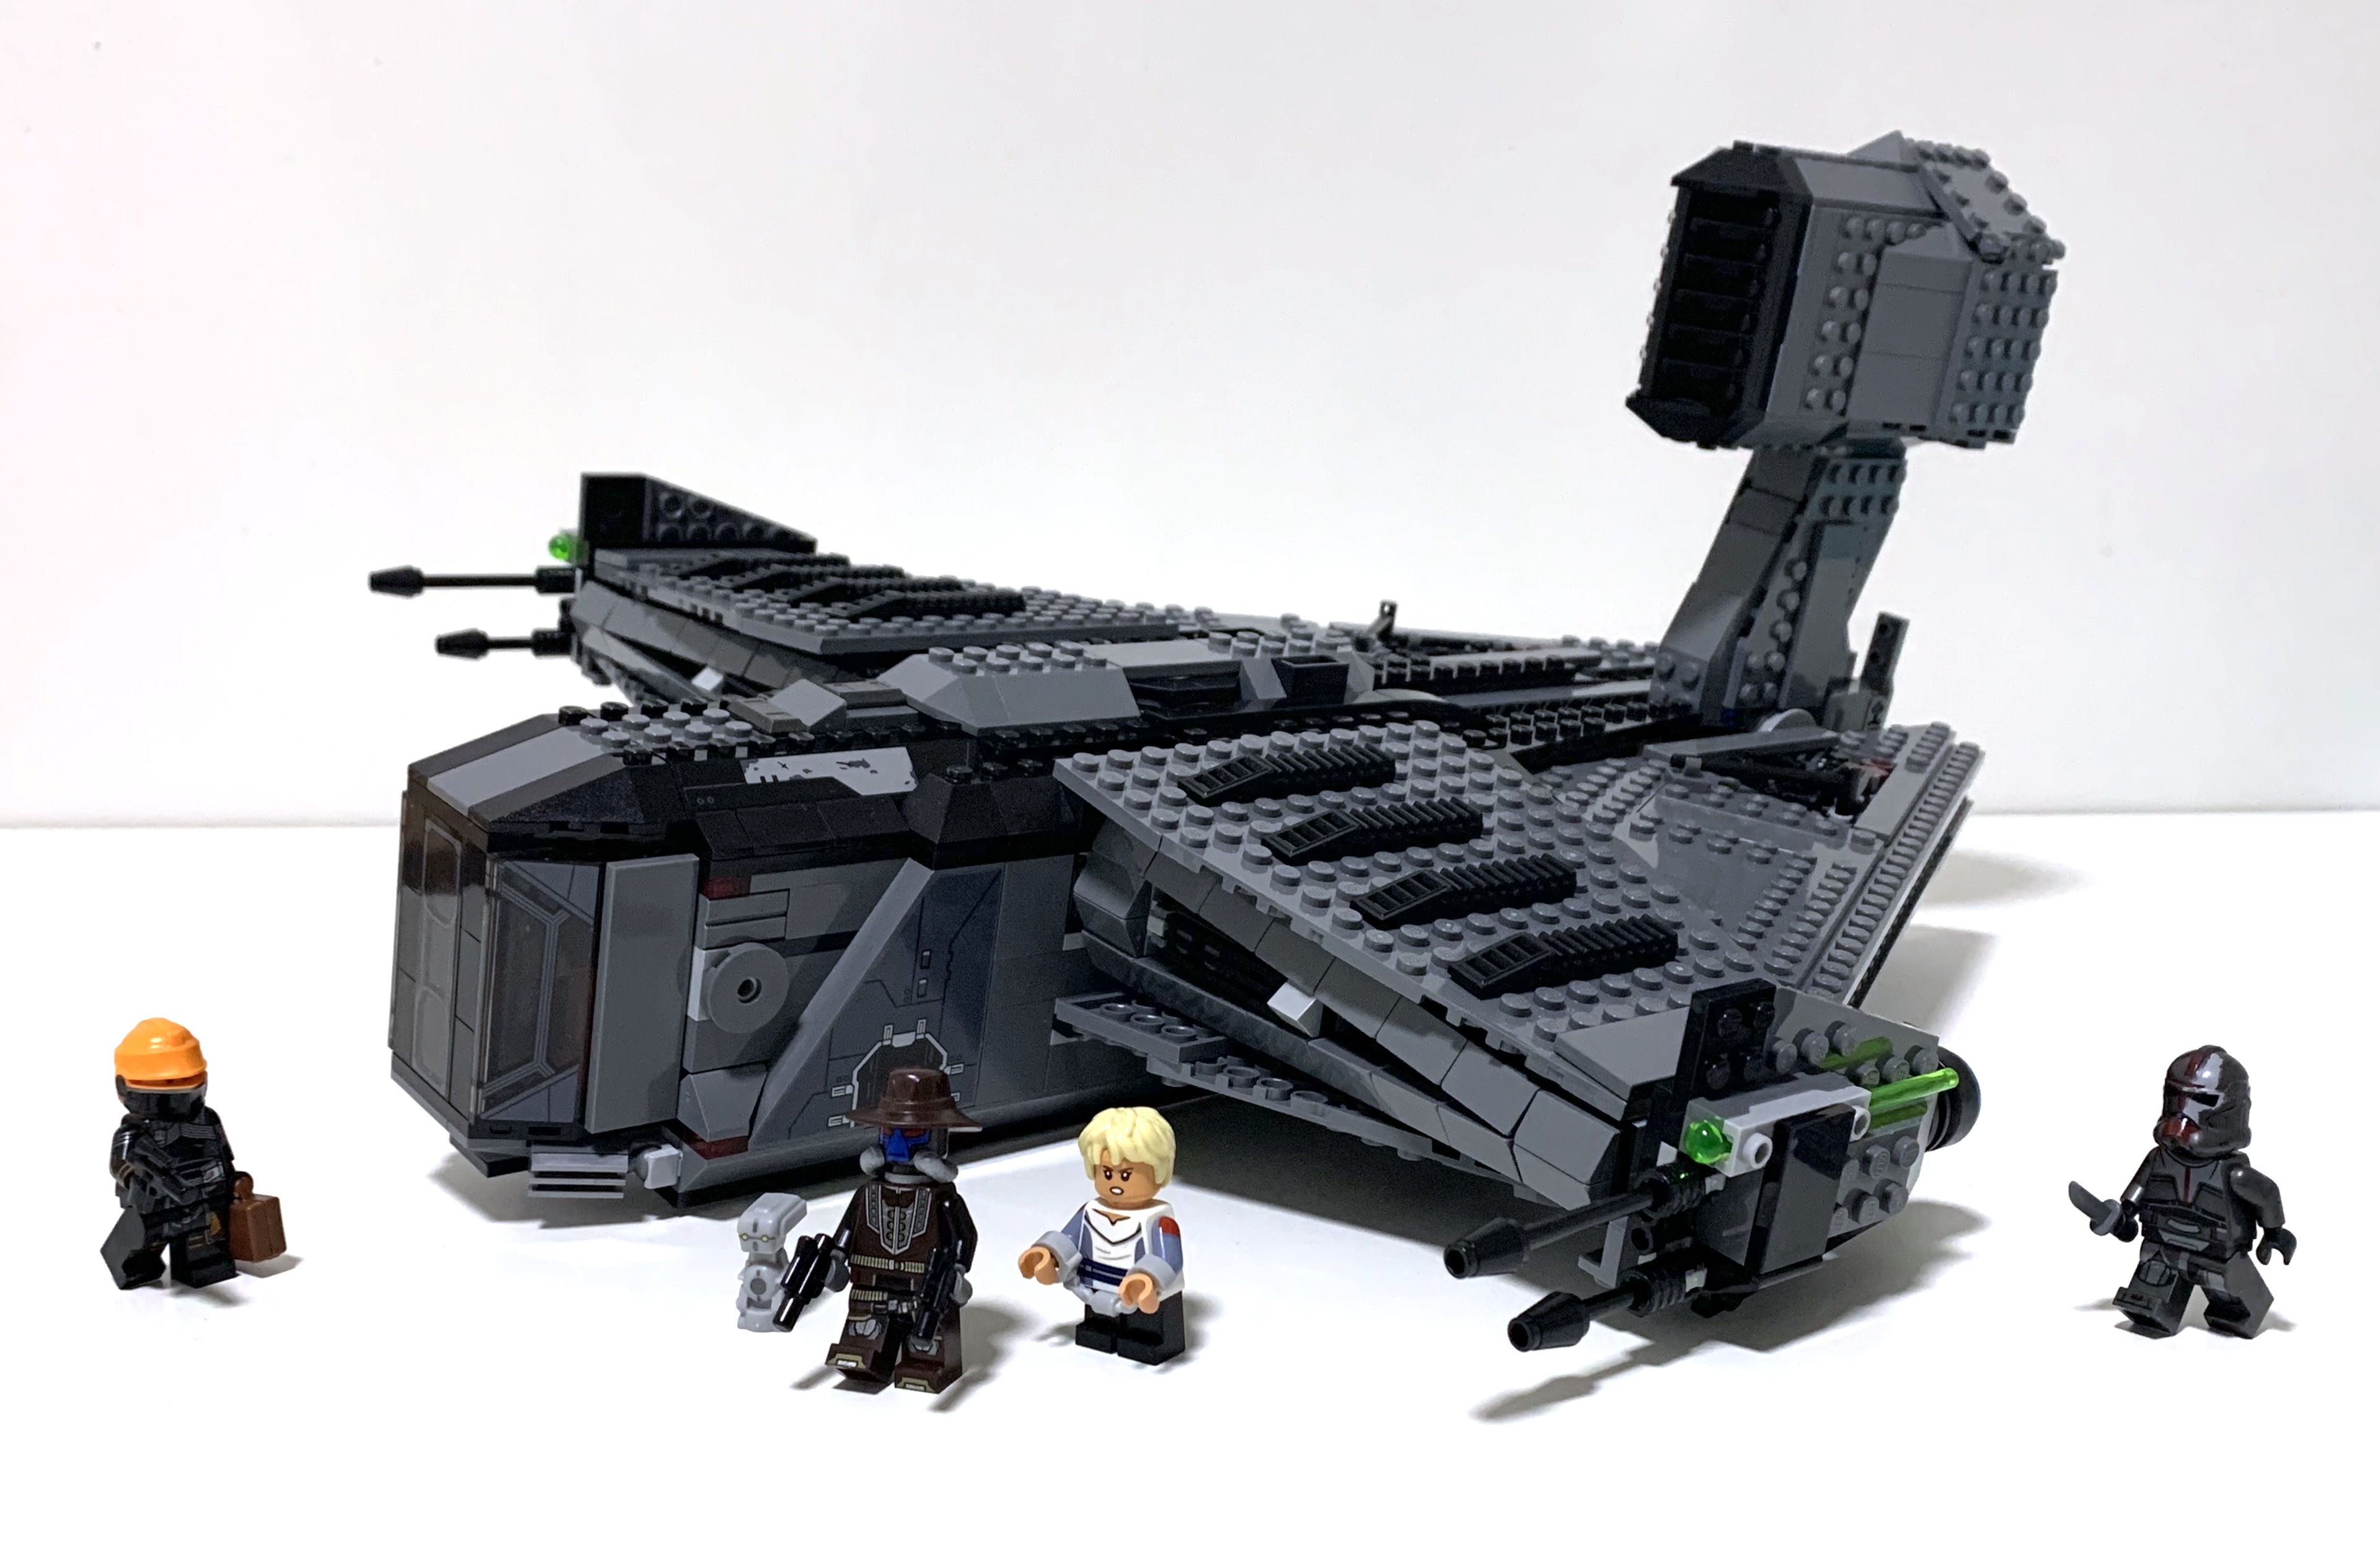 ▷ LEGO Reviews at Hothbricks - Independent Testing of LEGO Products